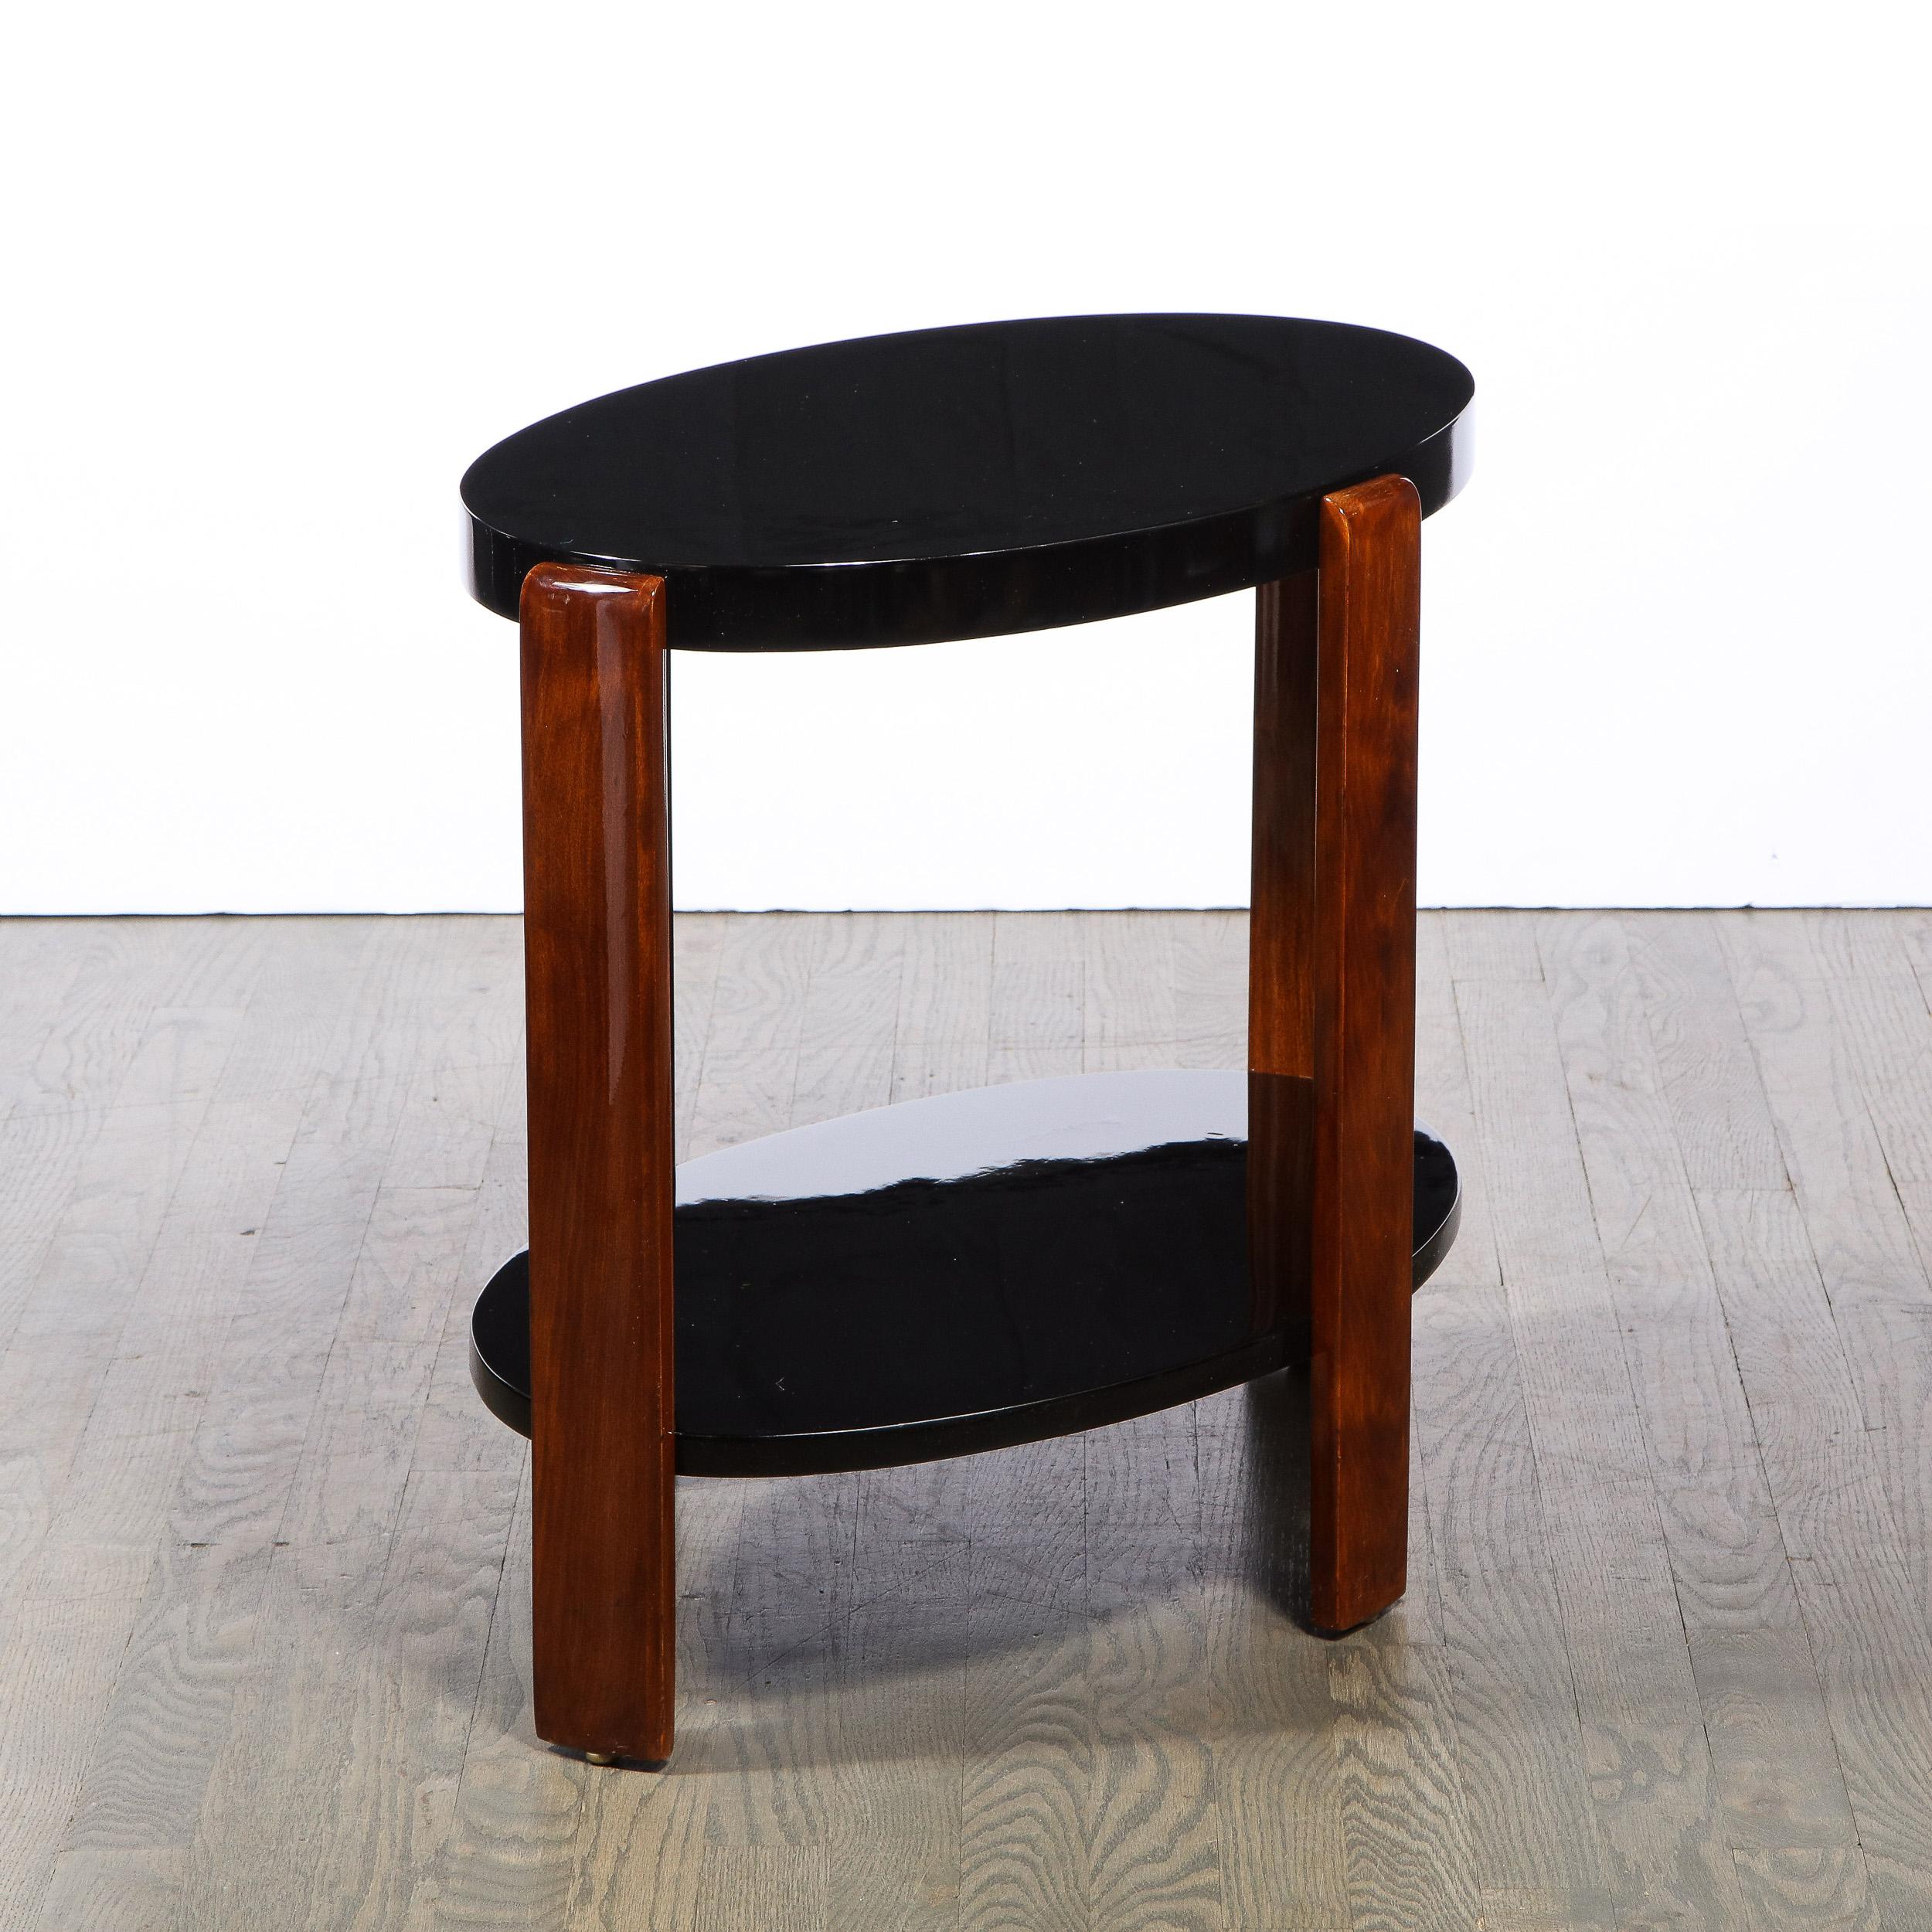 Mid-20th Century Art Deco Machine Age Streamlined 2 Tier Black Lacquer & Bookmatched Walnut Table